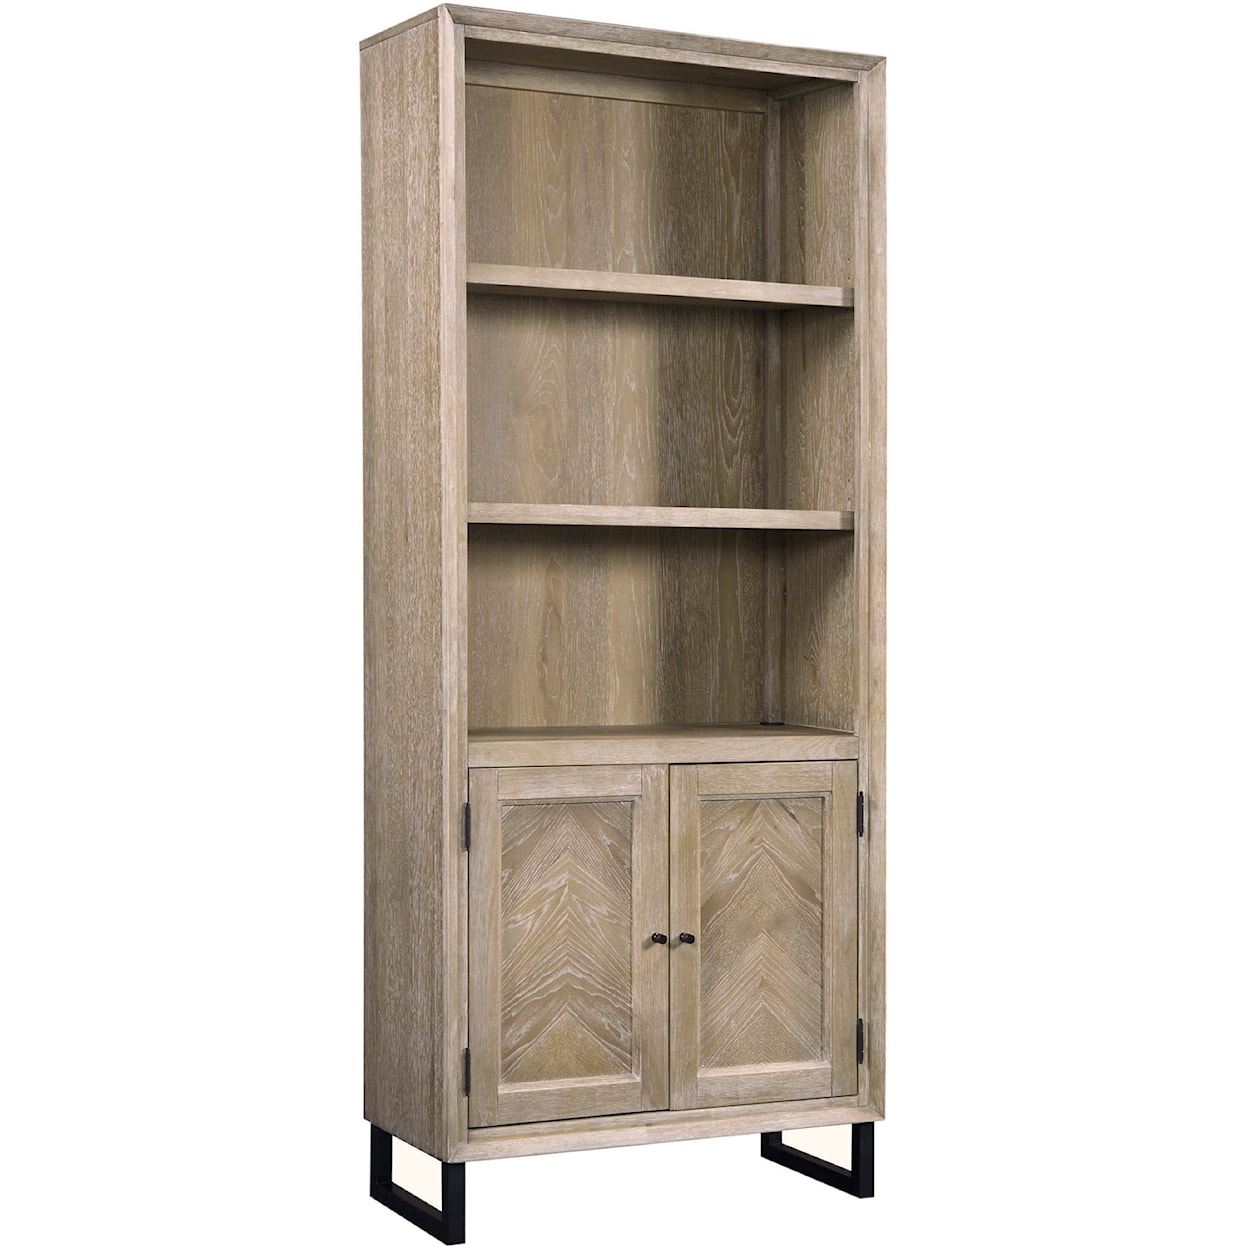 Aspenhome Harper Point Bookcase with Concealed Storage